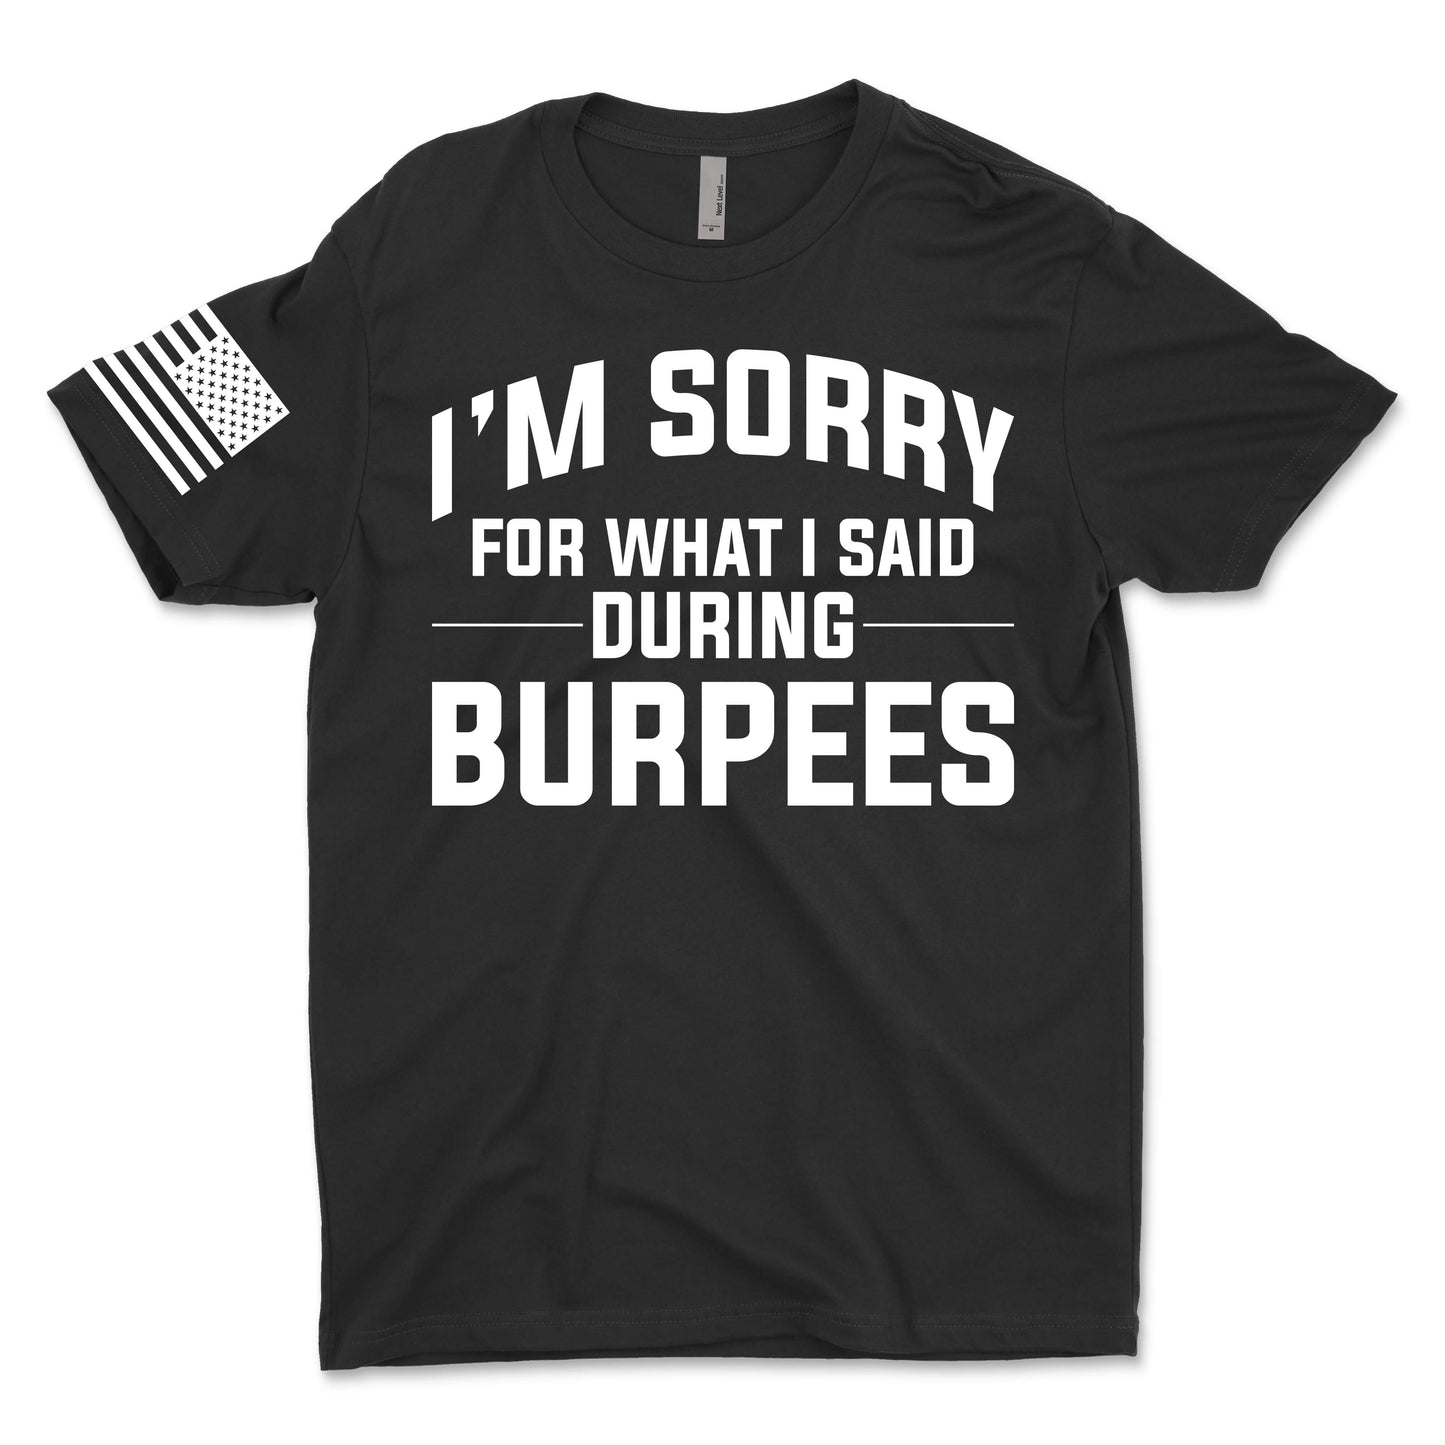 I'm Sorry For What I Said During Burpees Men's T-Shirt